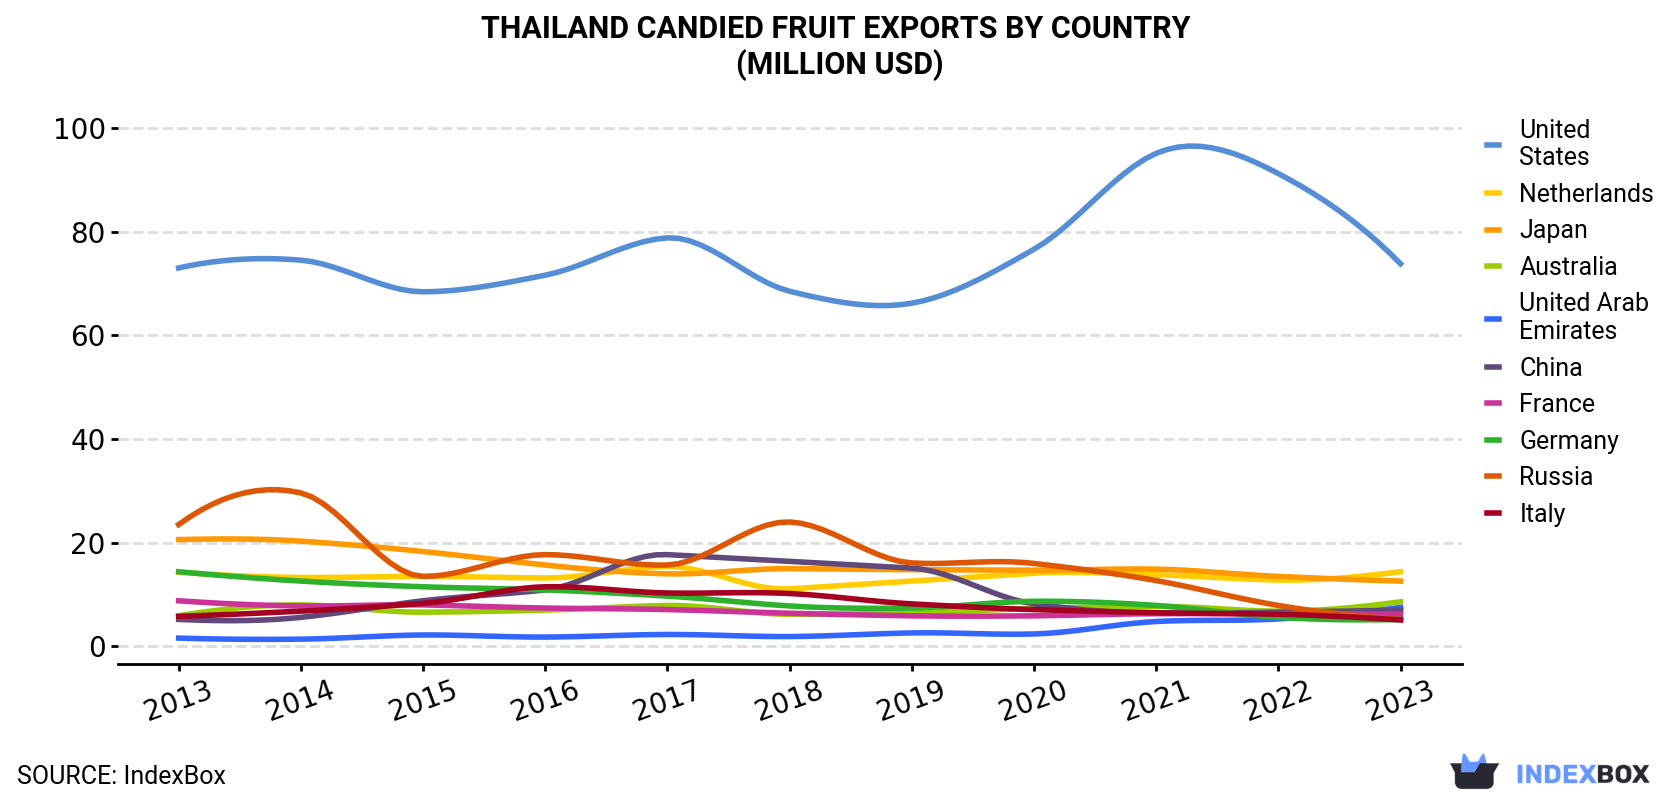 Thailand Candied Fruit Exports By Country (Million USD)